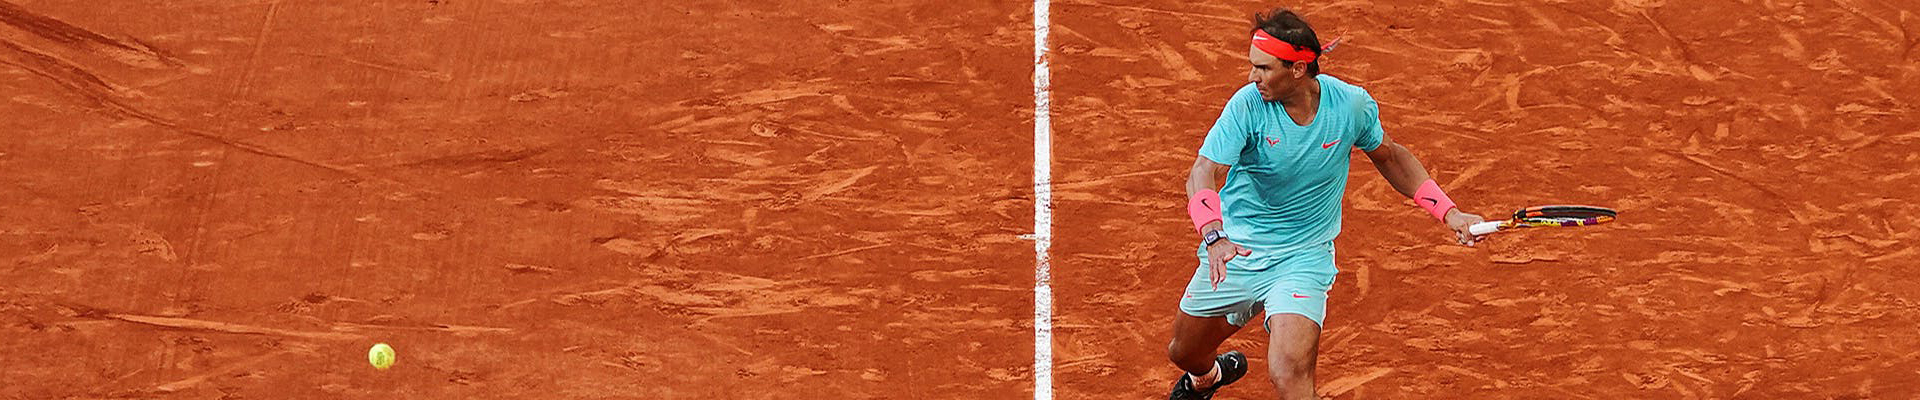 French Open 2020 Header Image